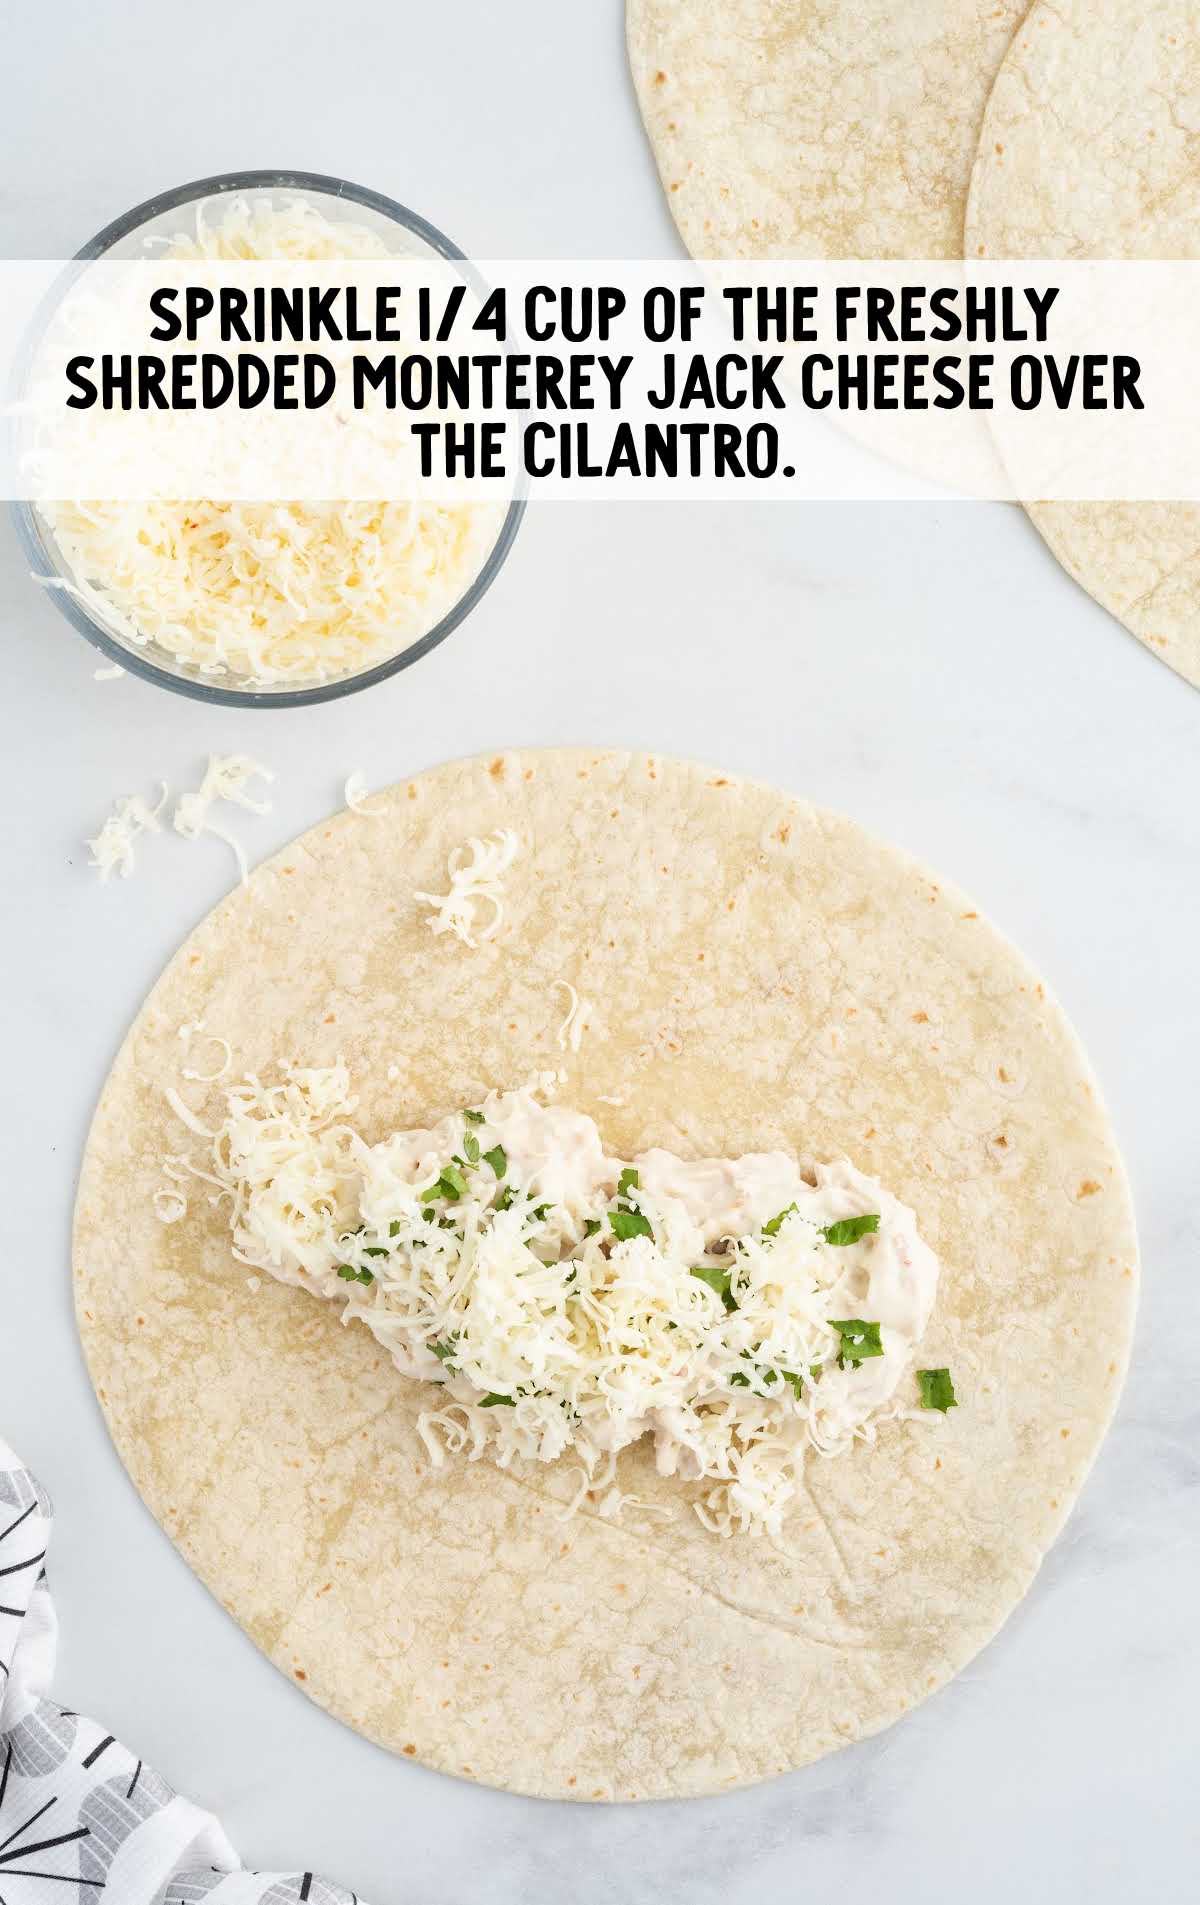 shredded montery cheese sprinkled over the cilantro